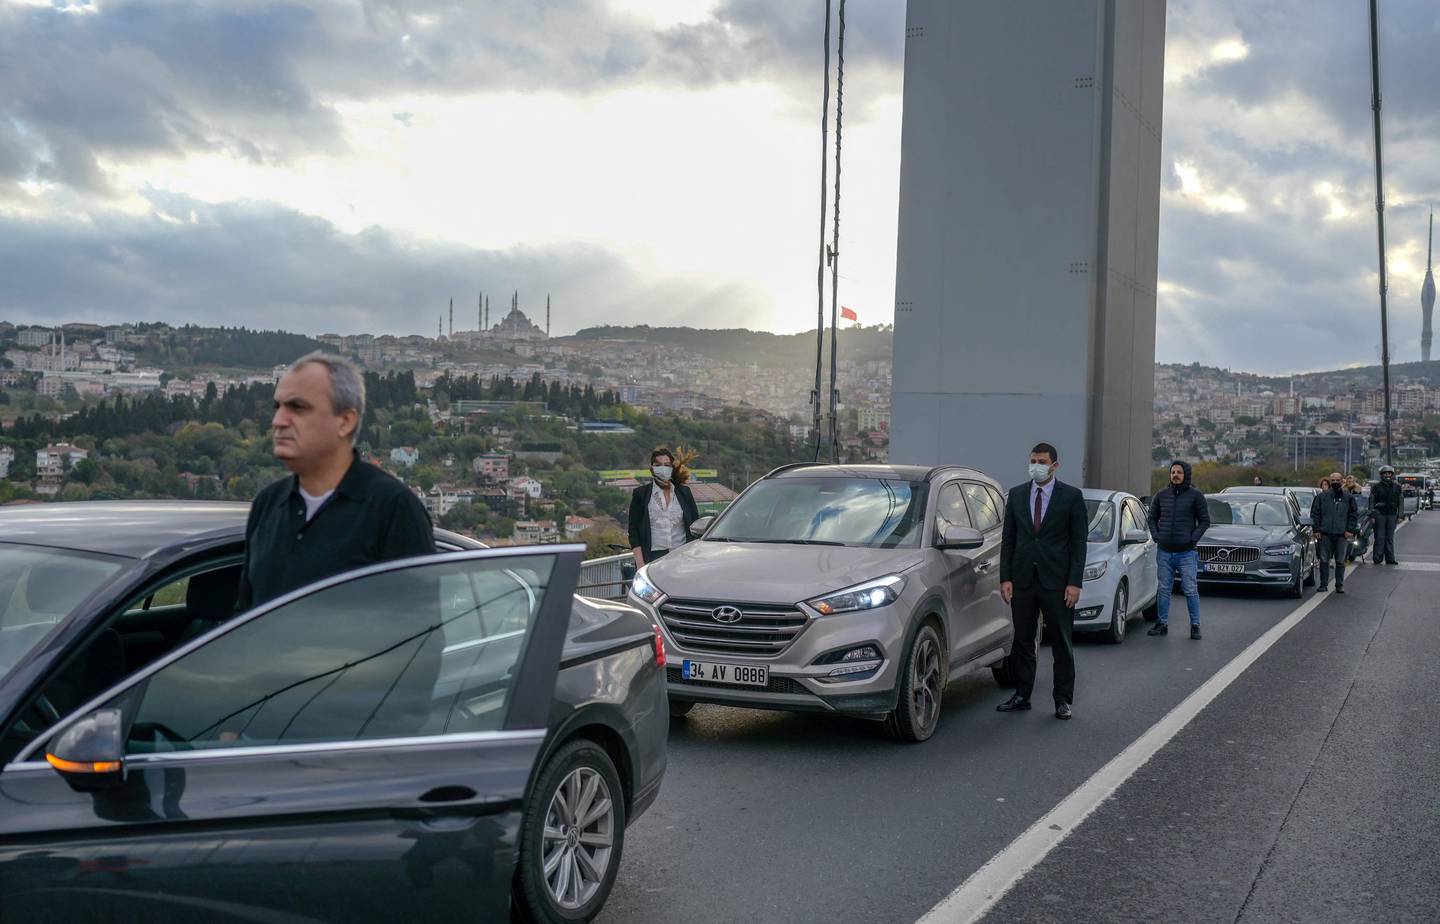 People stand by their vehicles to pay their respects at 09:05 am, the time of death of Mustafa Kemal Ataturk, founder of the Republic of Turkey, on November 10, 2021, in Istanbul, at the 15 July Martyrs Bridge. AFP